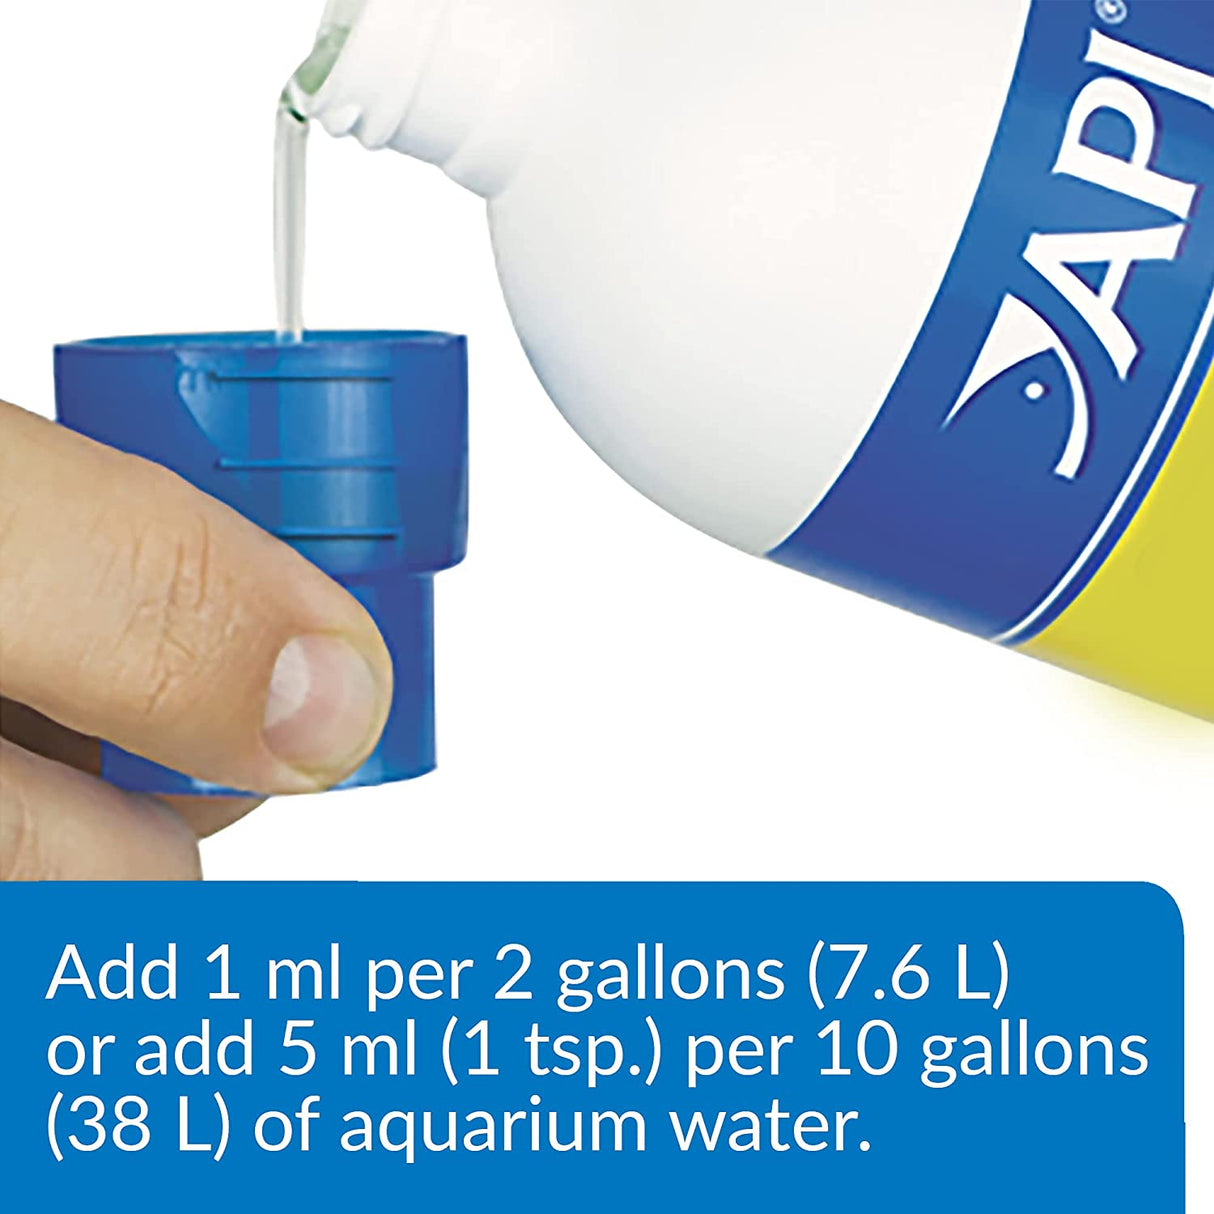 40 oz (5 x 8 oz) API Turtle Water Conditioner Makes Tap Water Safe